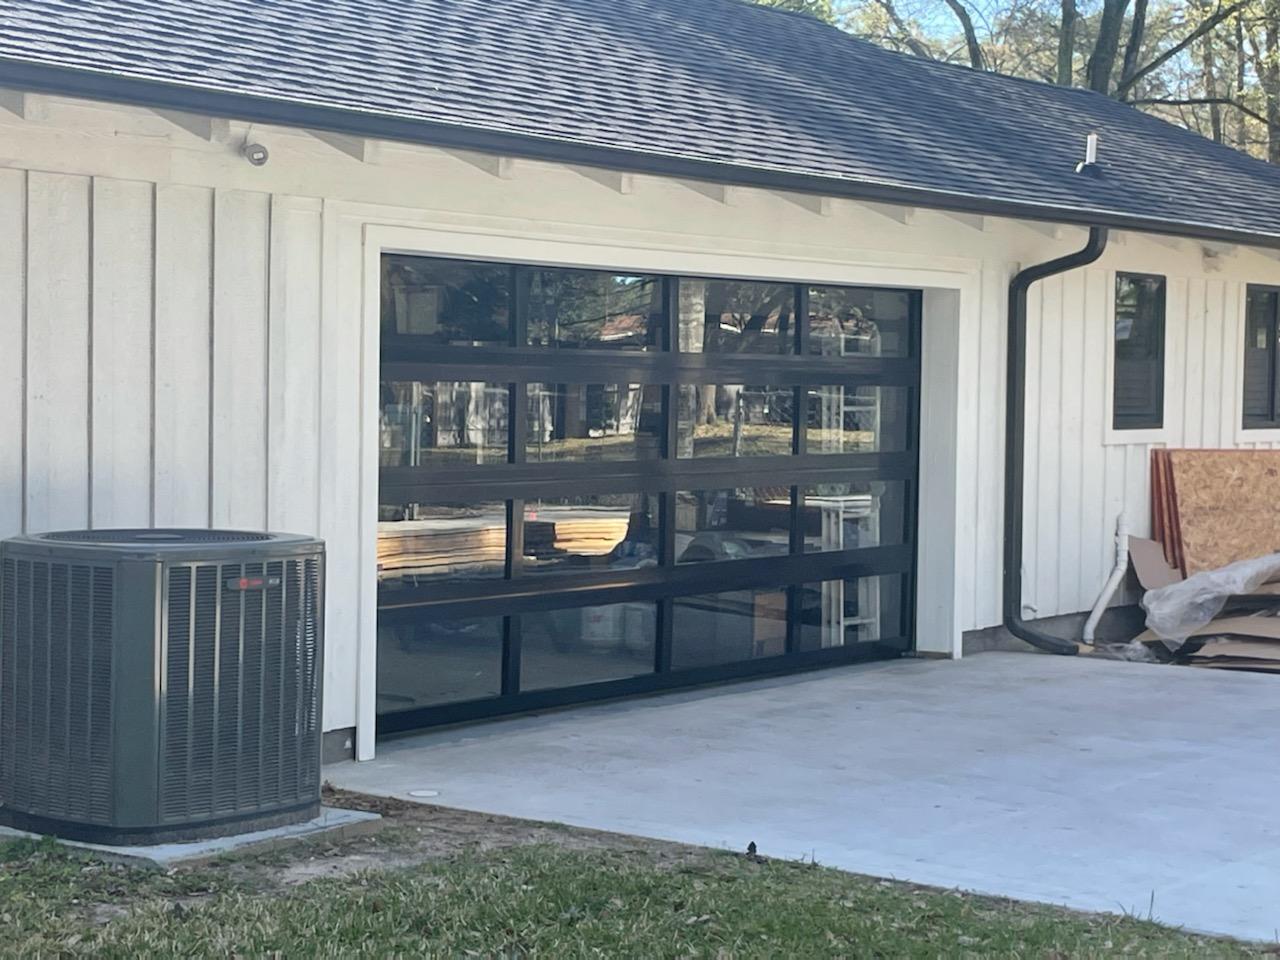 16 FT Wide By 8 FT Tall Full View Garage Door Matt Black Finish With C